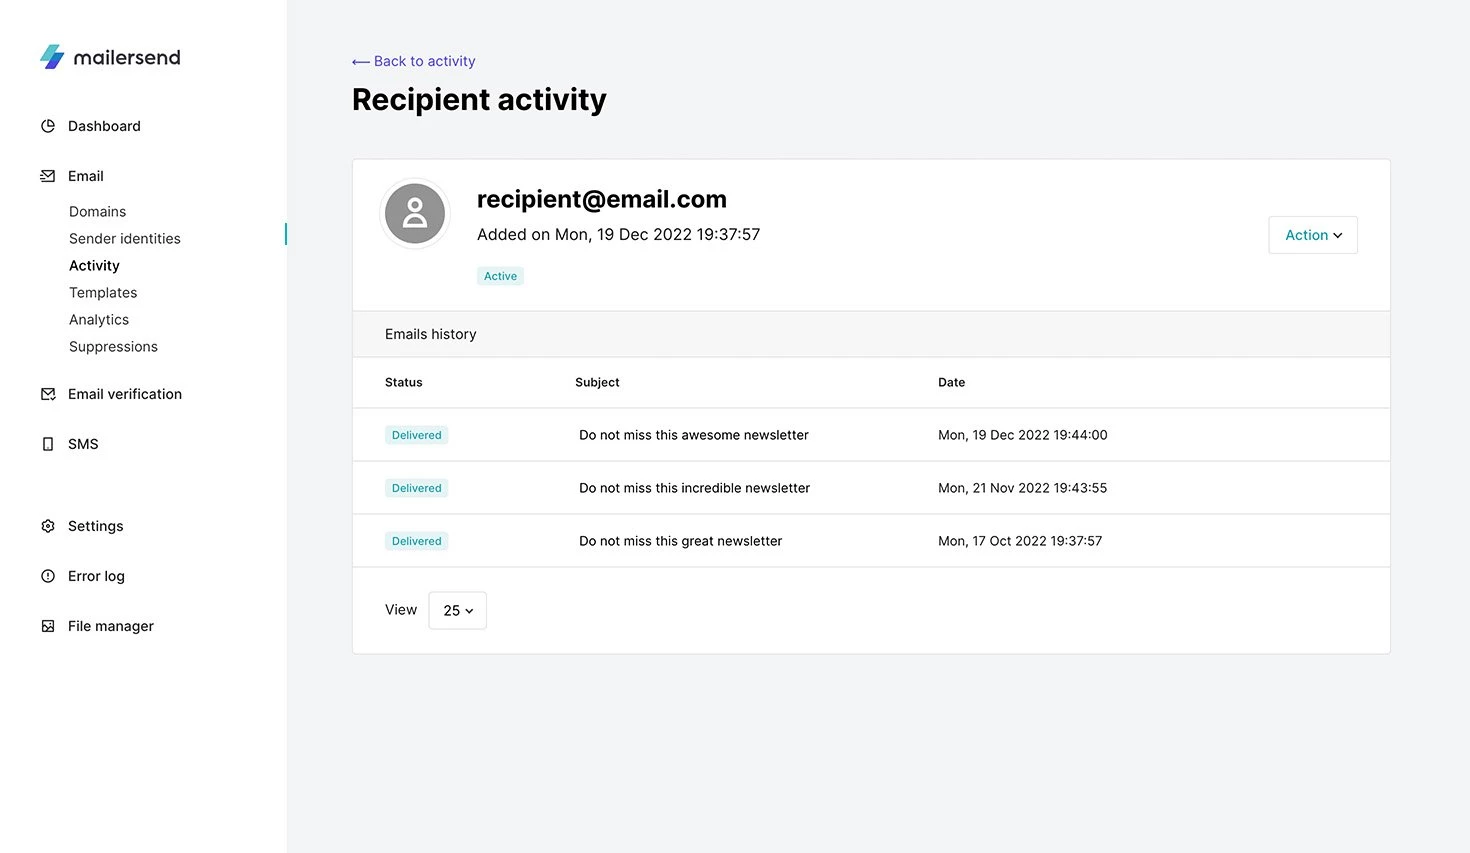 Page showing the activity of a specific recipient in MailerSend.